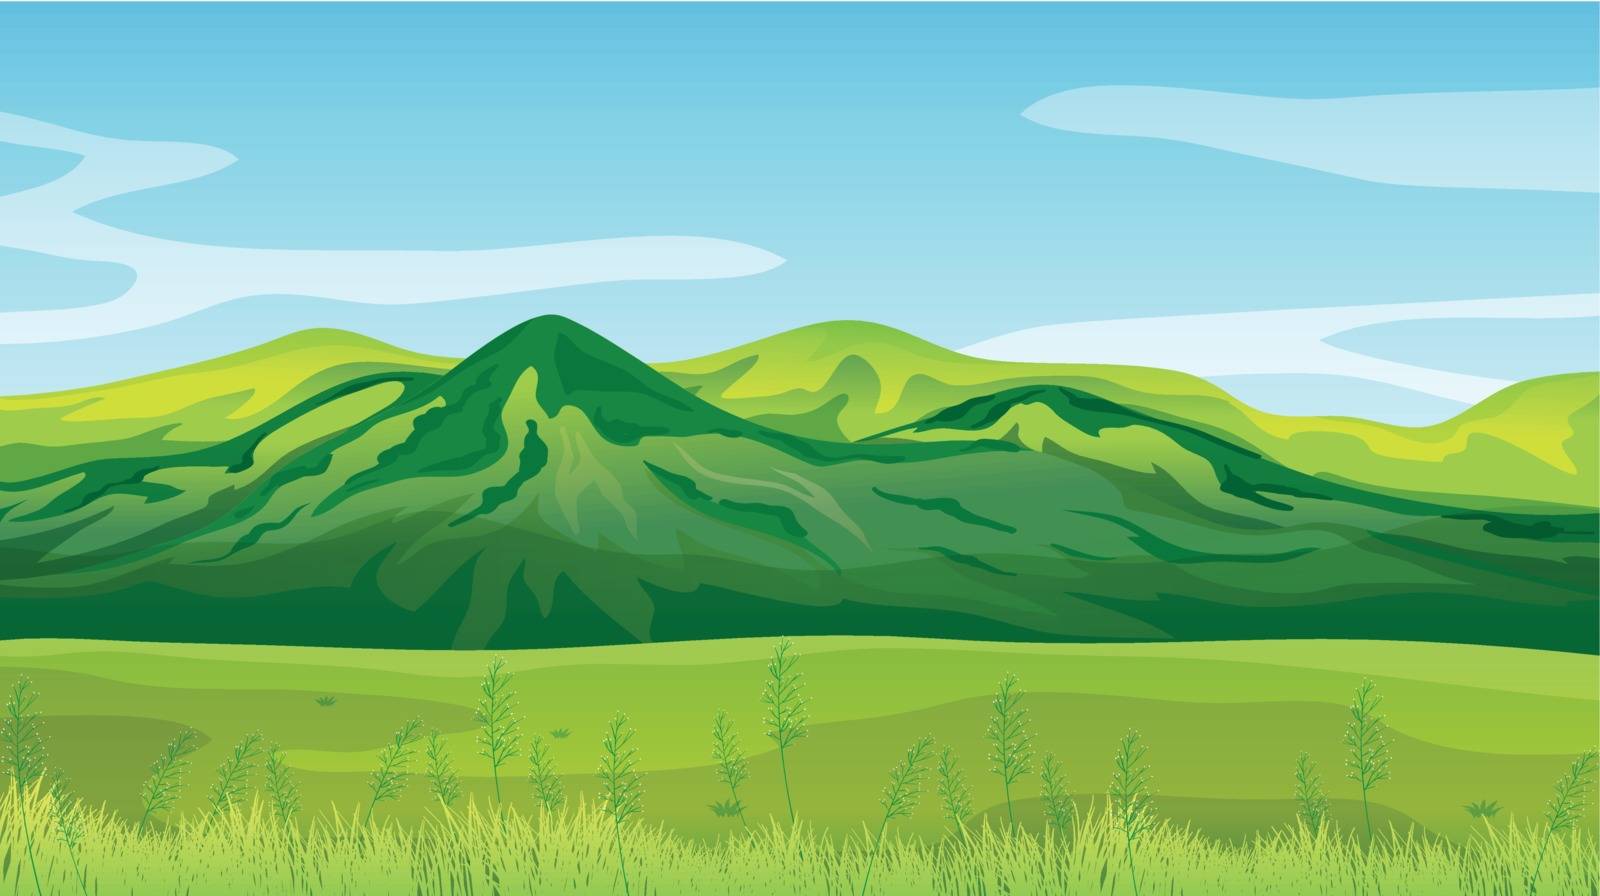 Illustration of the high mountains